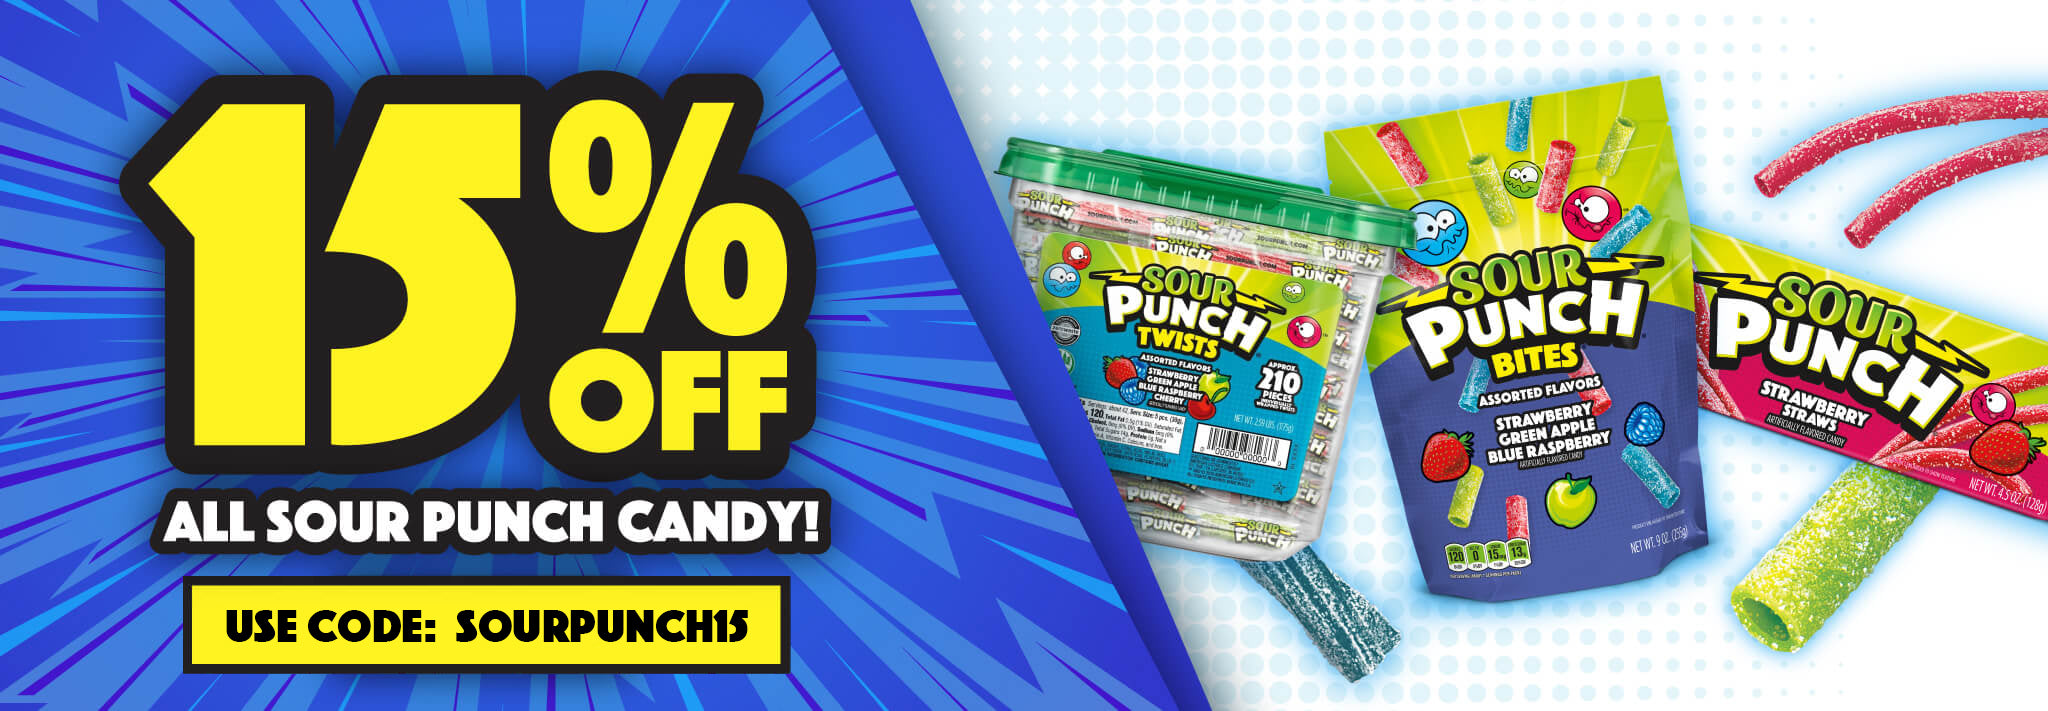 15% Off All SOUR PUNCH wholesale candy! Use Code: SOURPUNCH15 at checkout